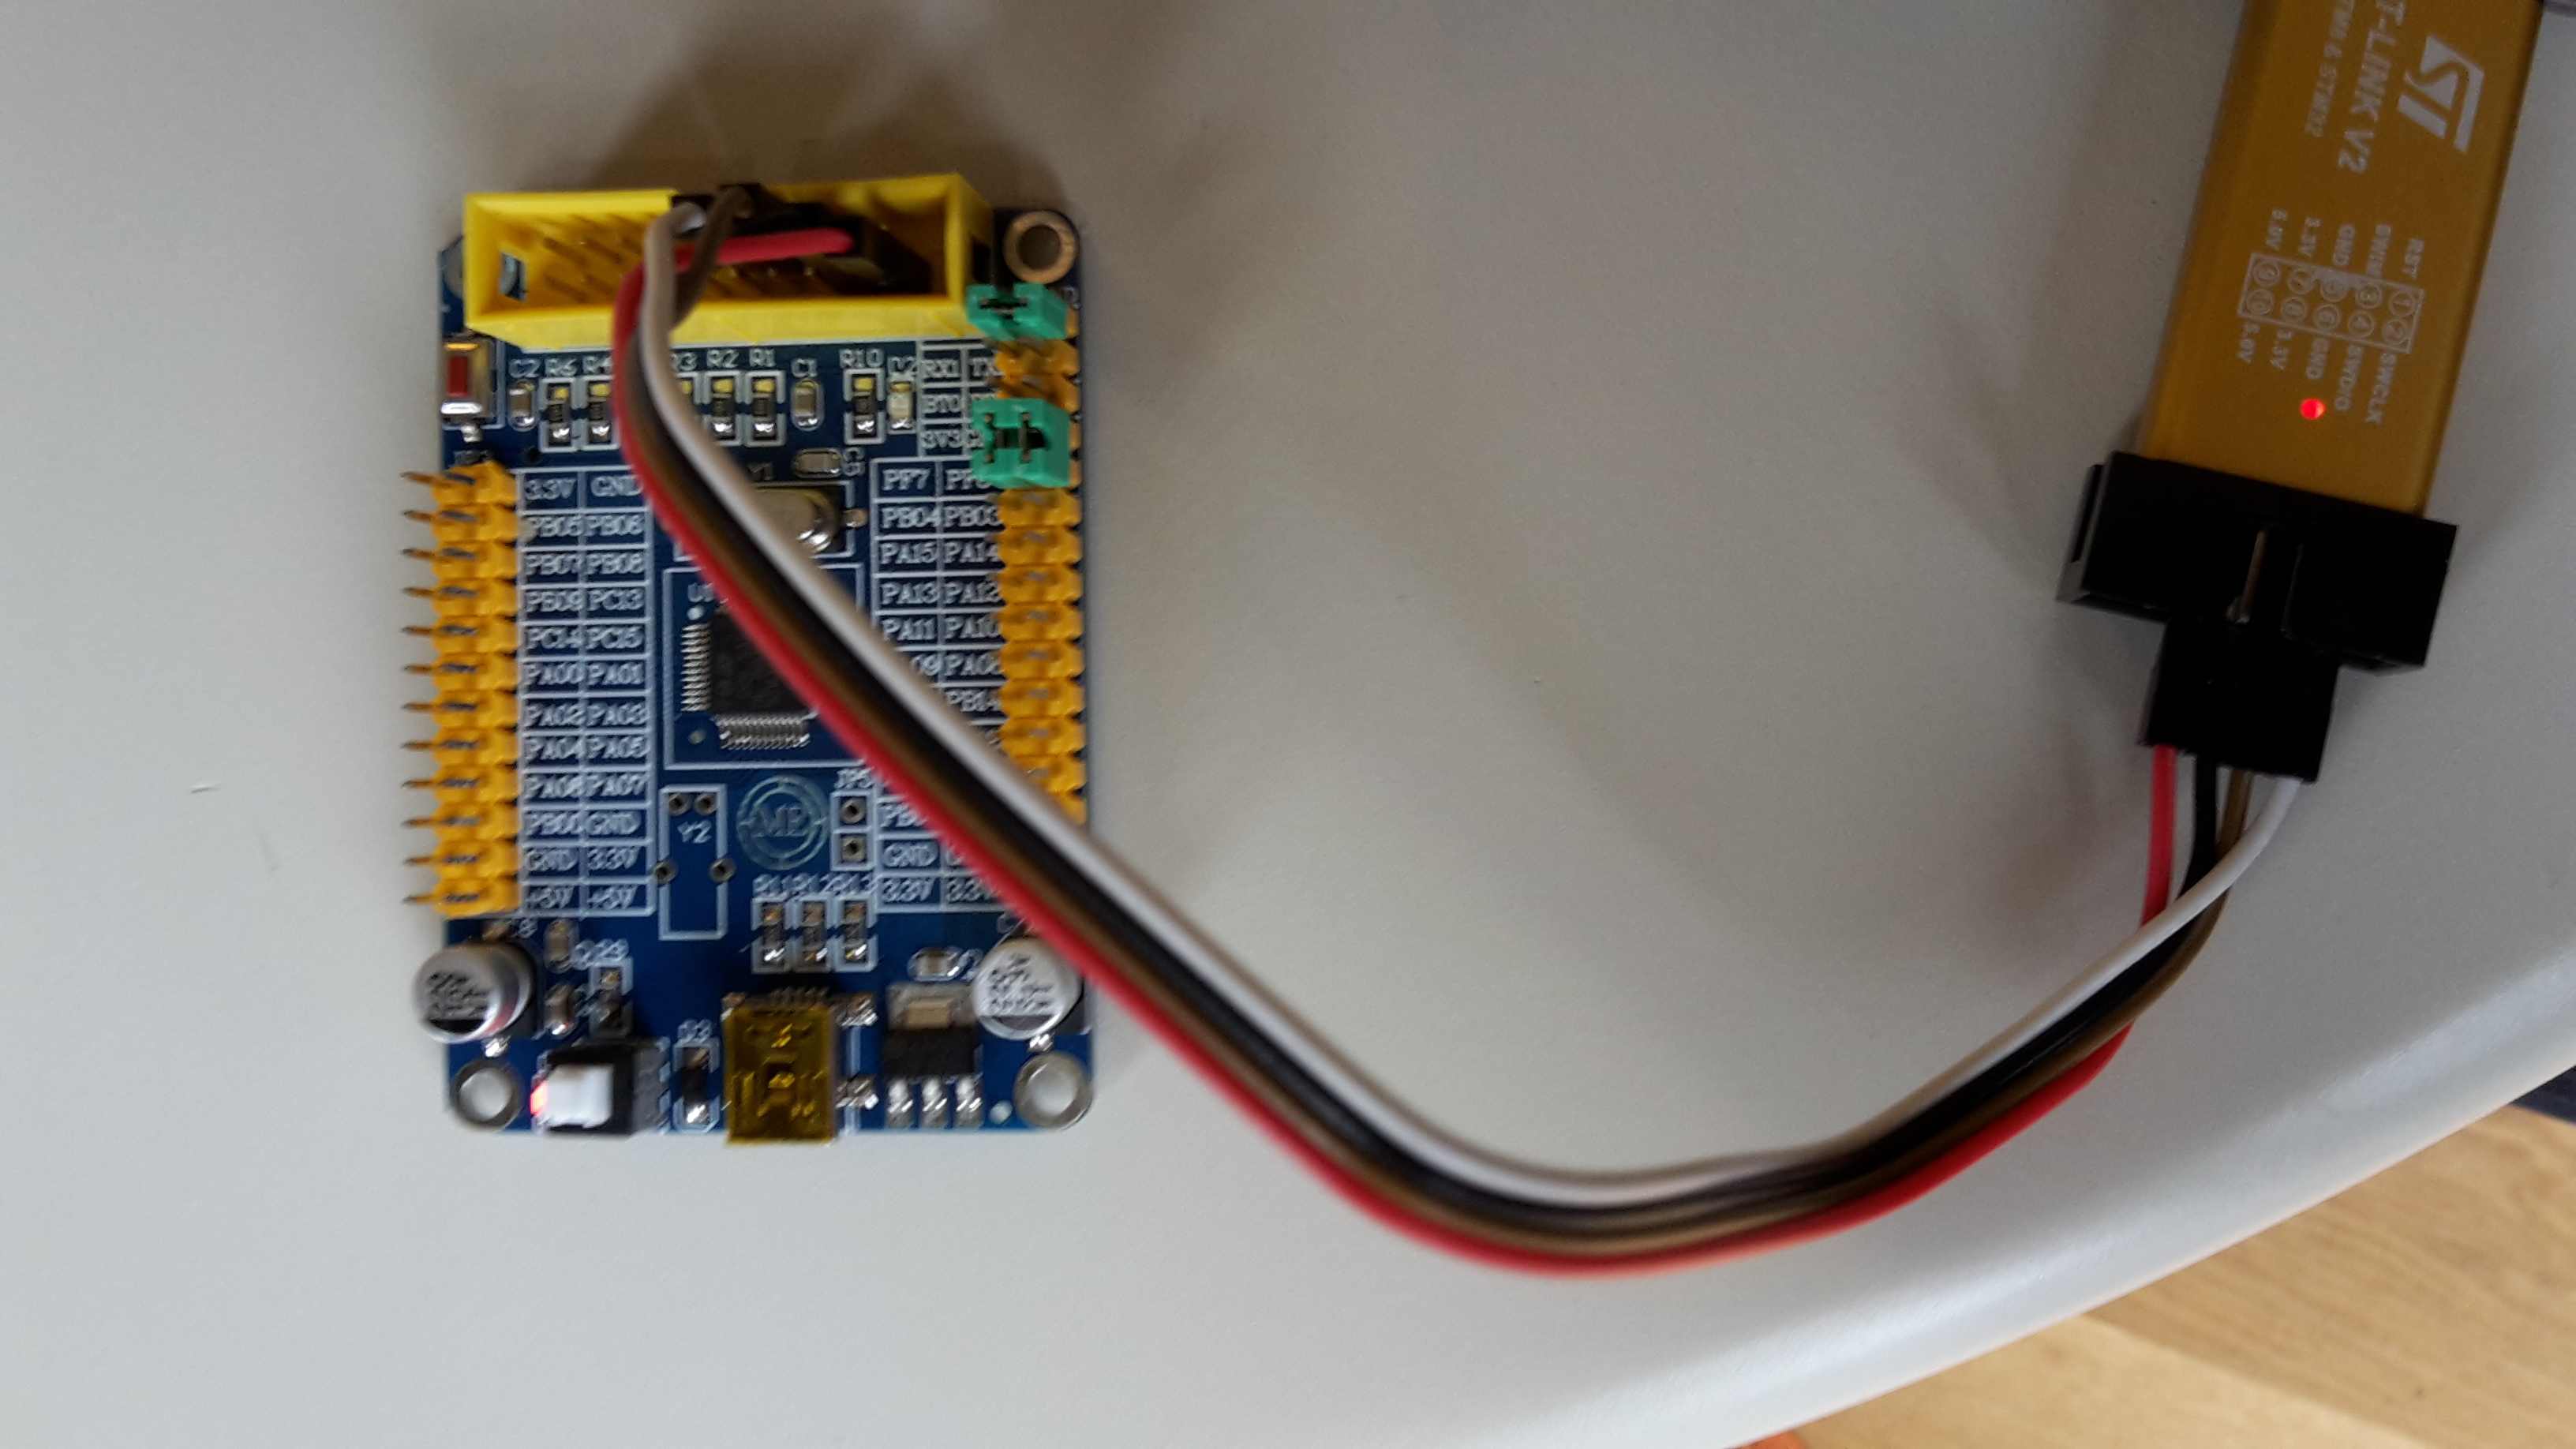 STM32 with programmer